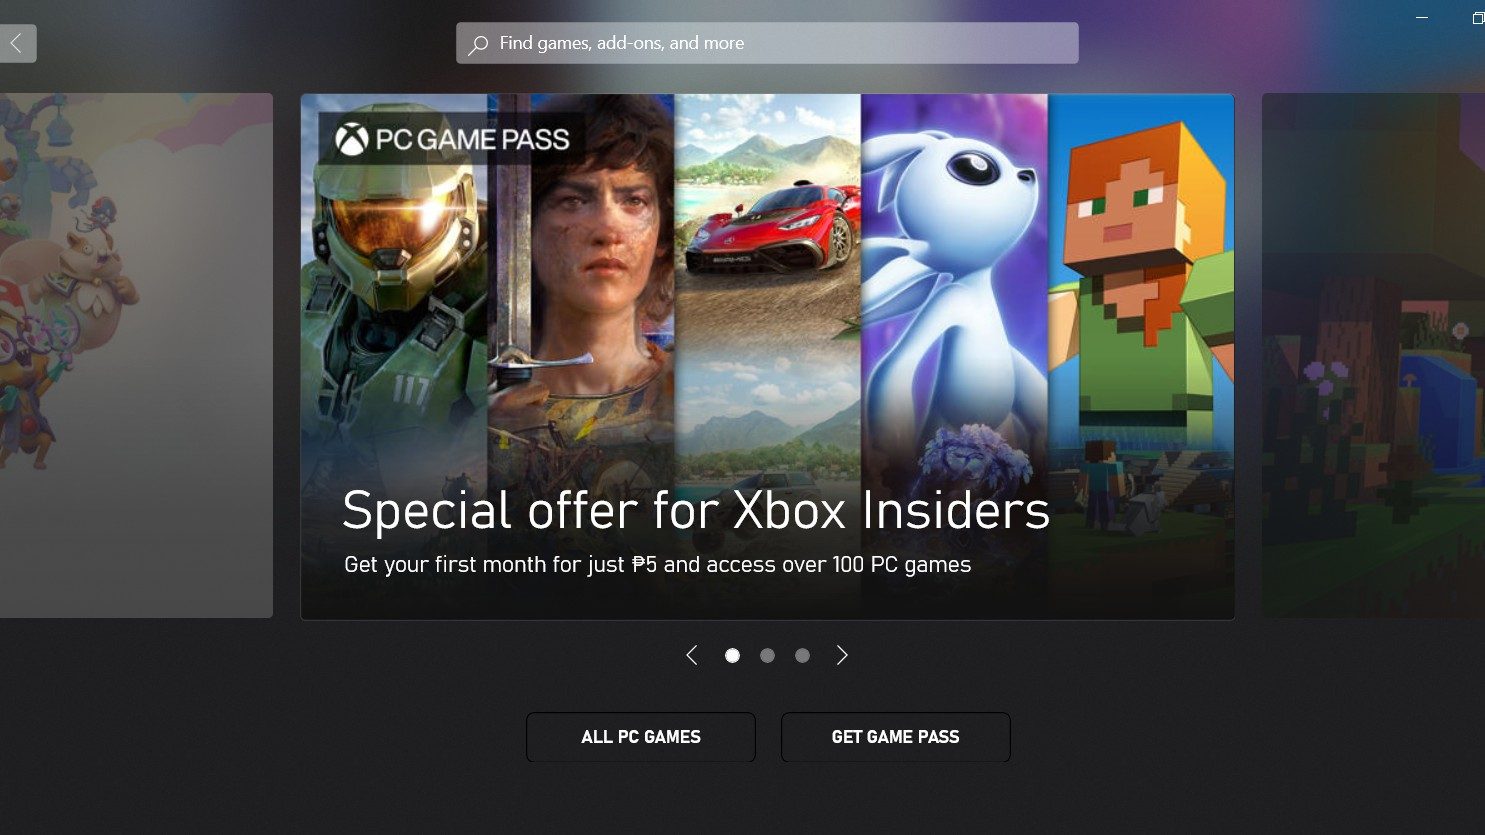 Microsoft to bring Game Pass streaming service to PCs, and sell